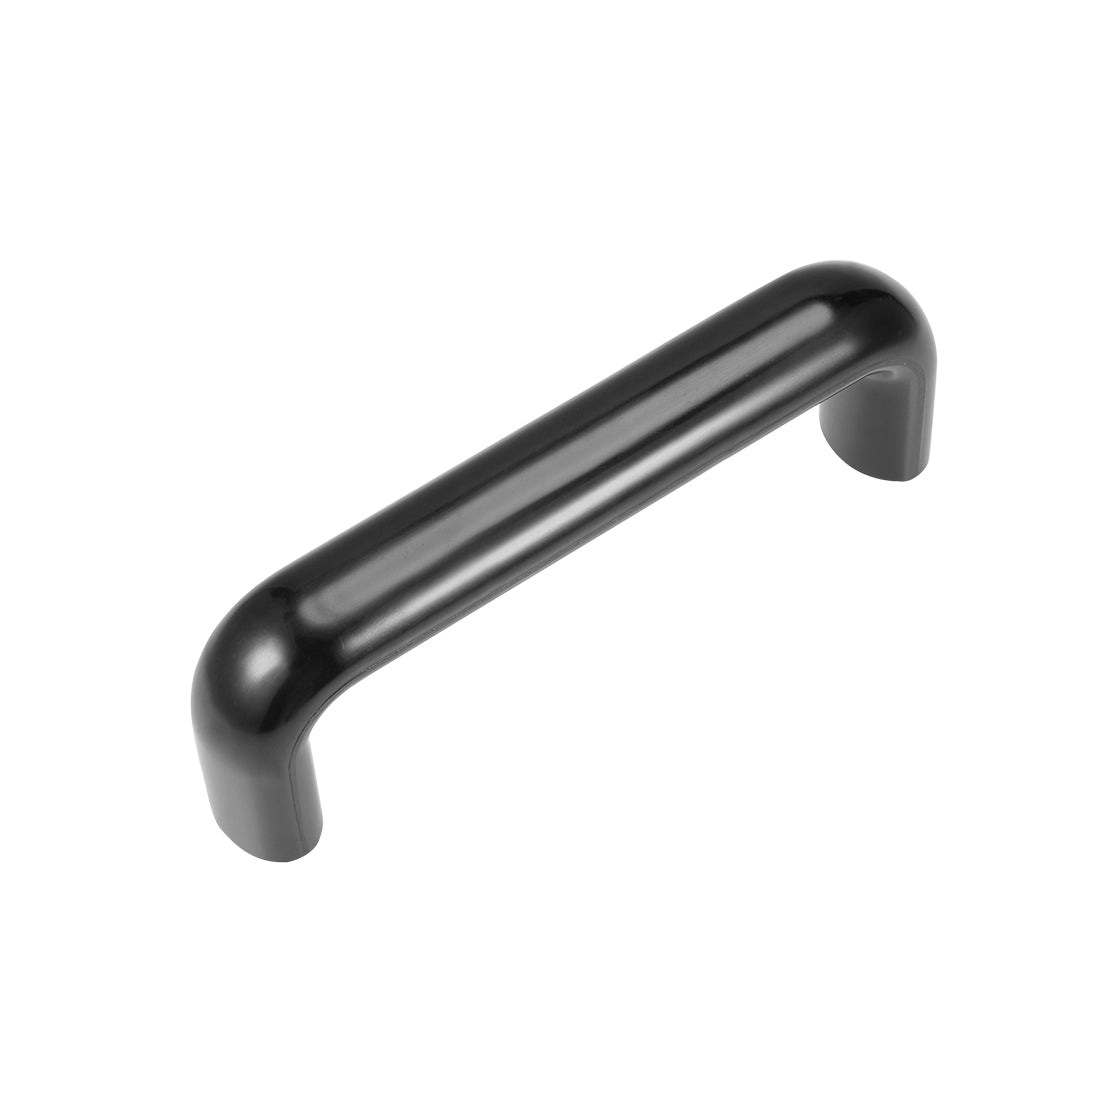 uxcell Uxcell Bakelite Plastic Pulls Handle 160mm Hole Centers Black for Industrial Machine